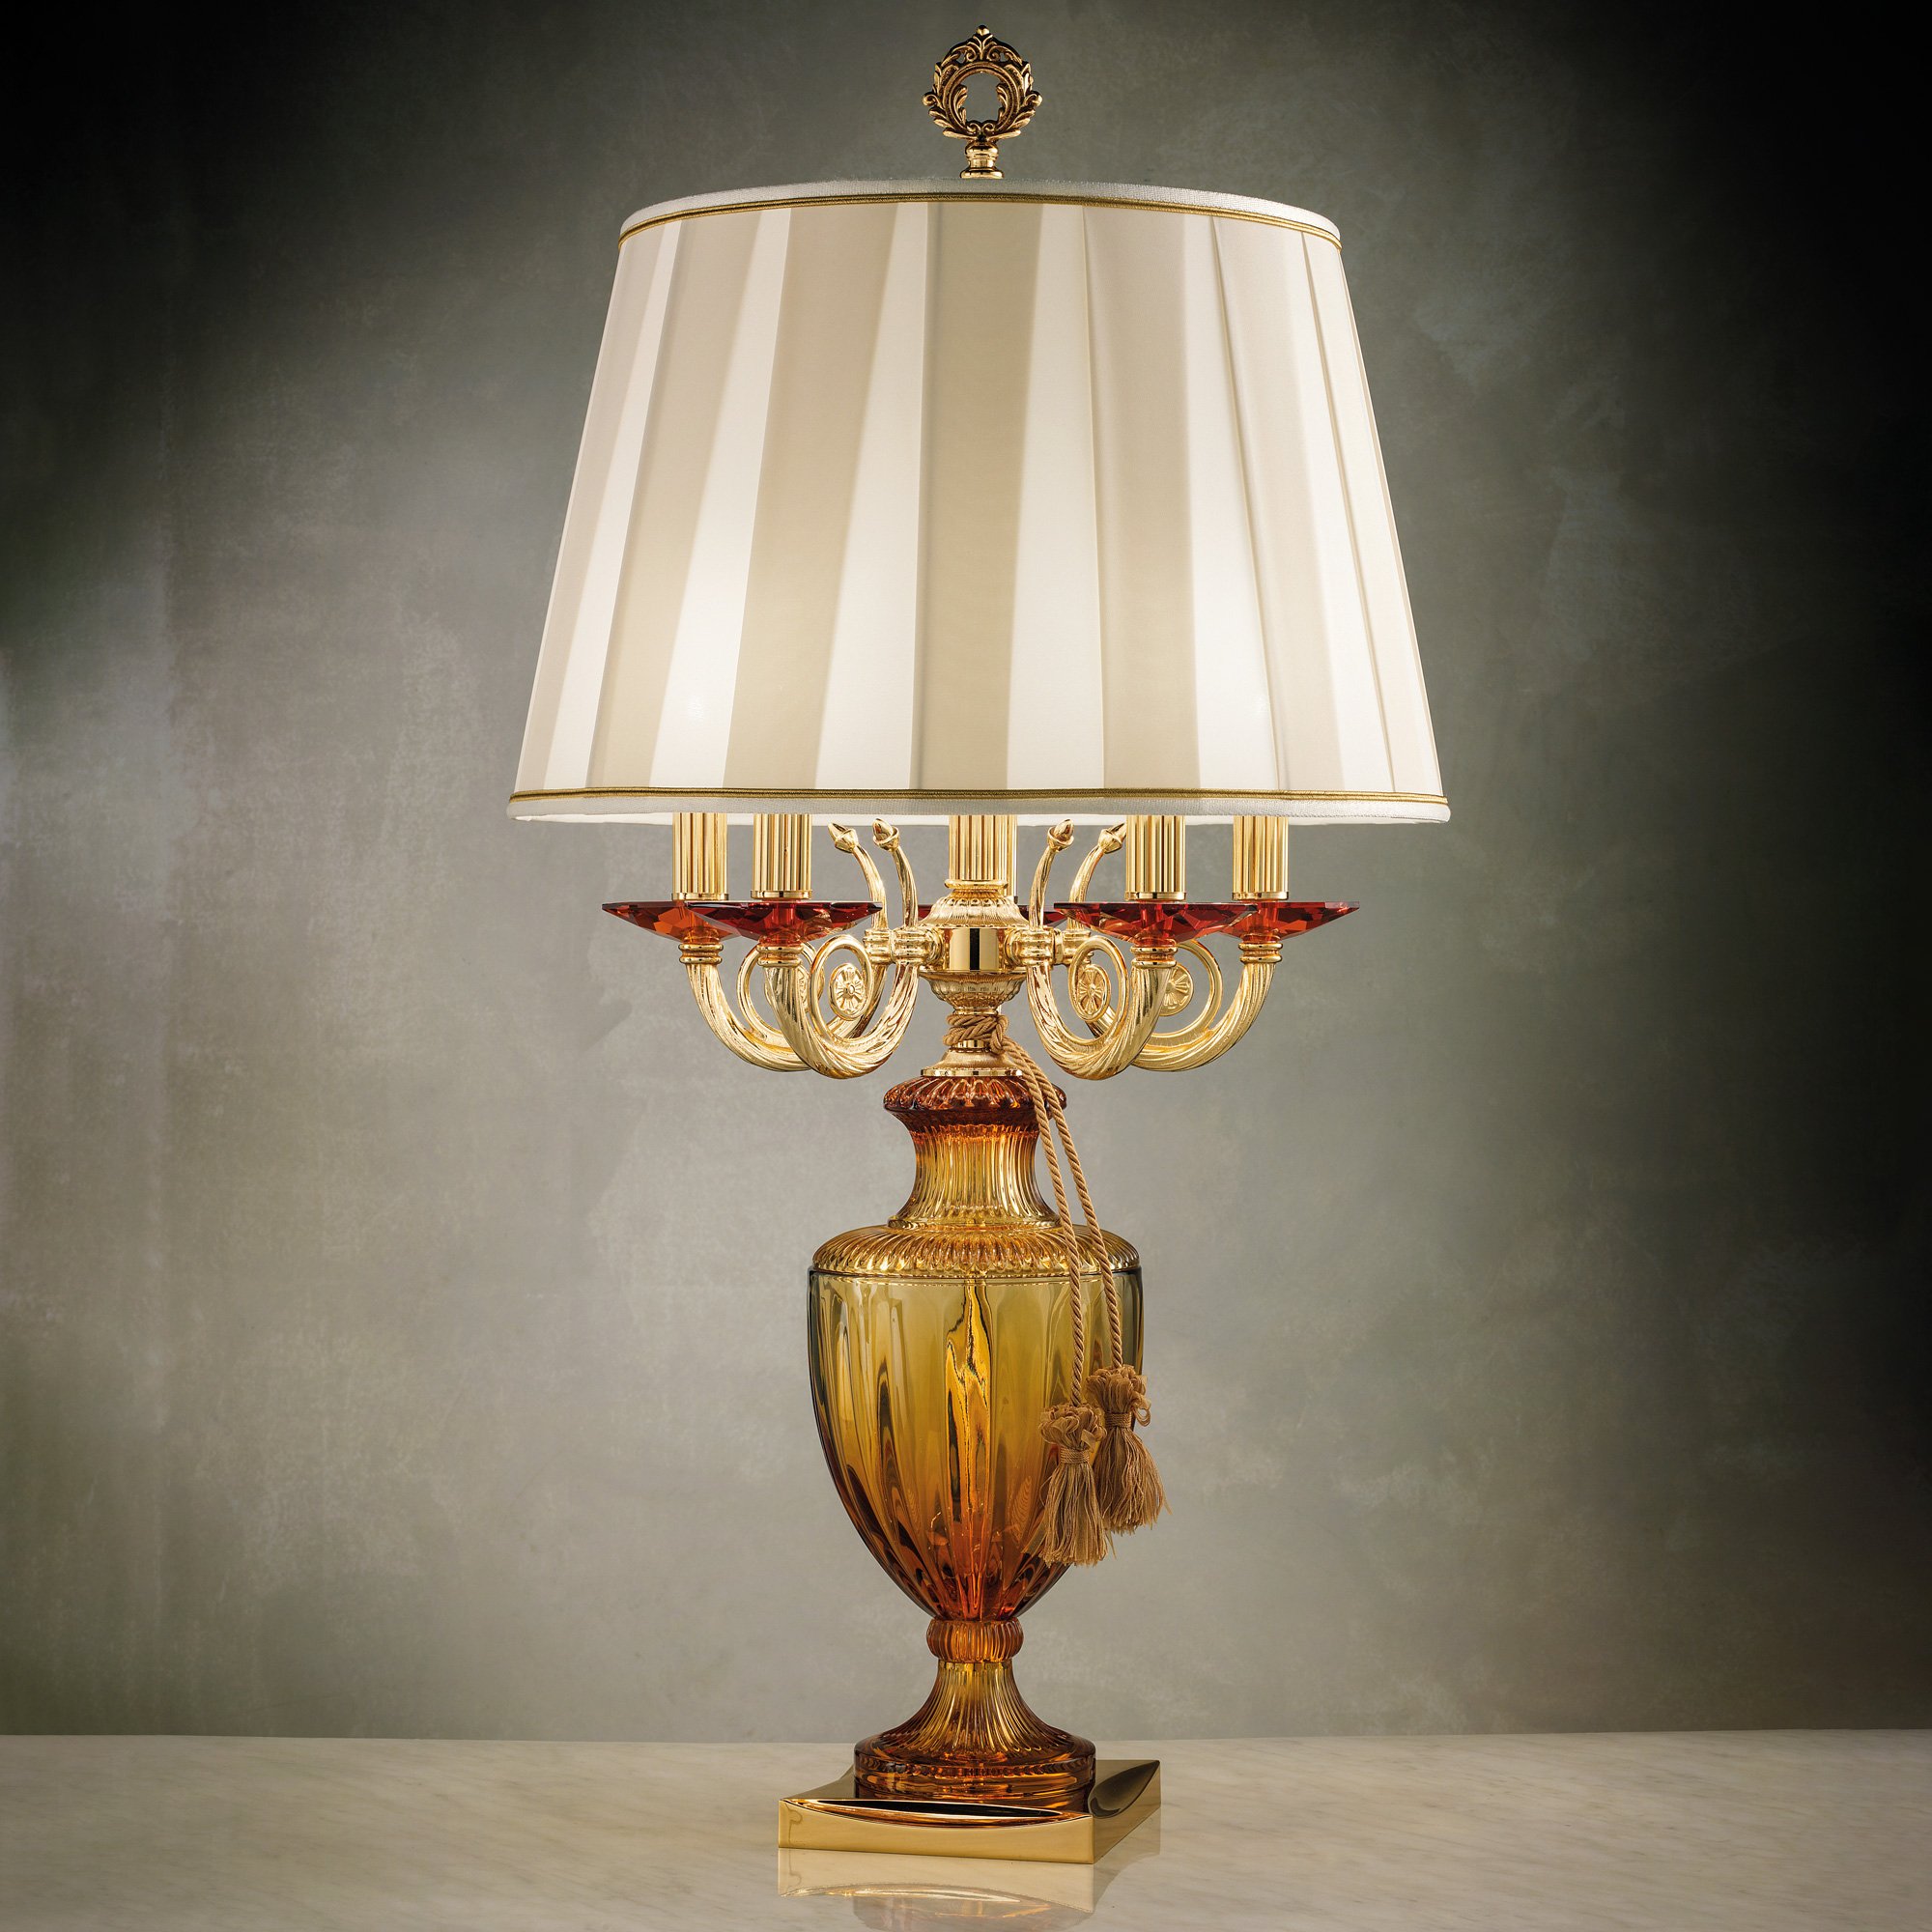 Classic Candelabra Style Table Lamp